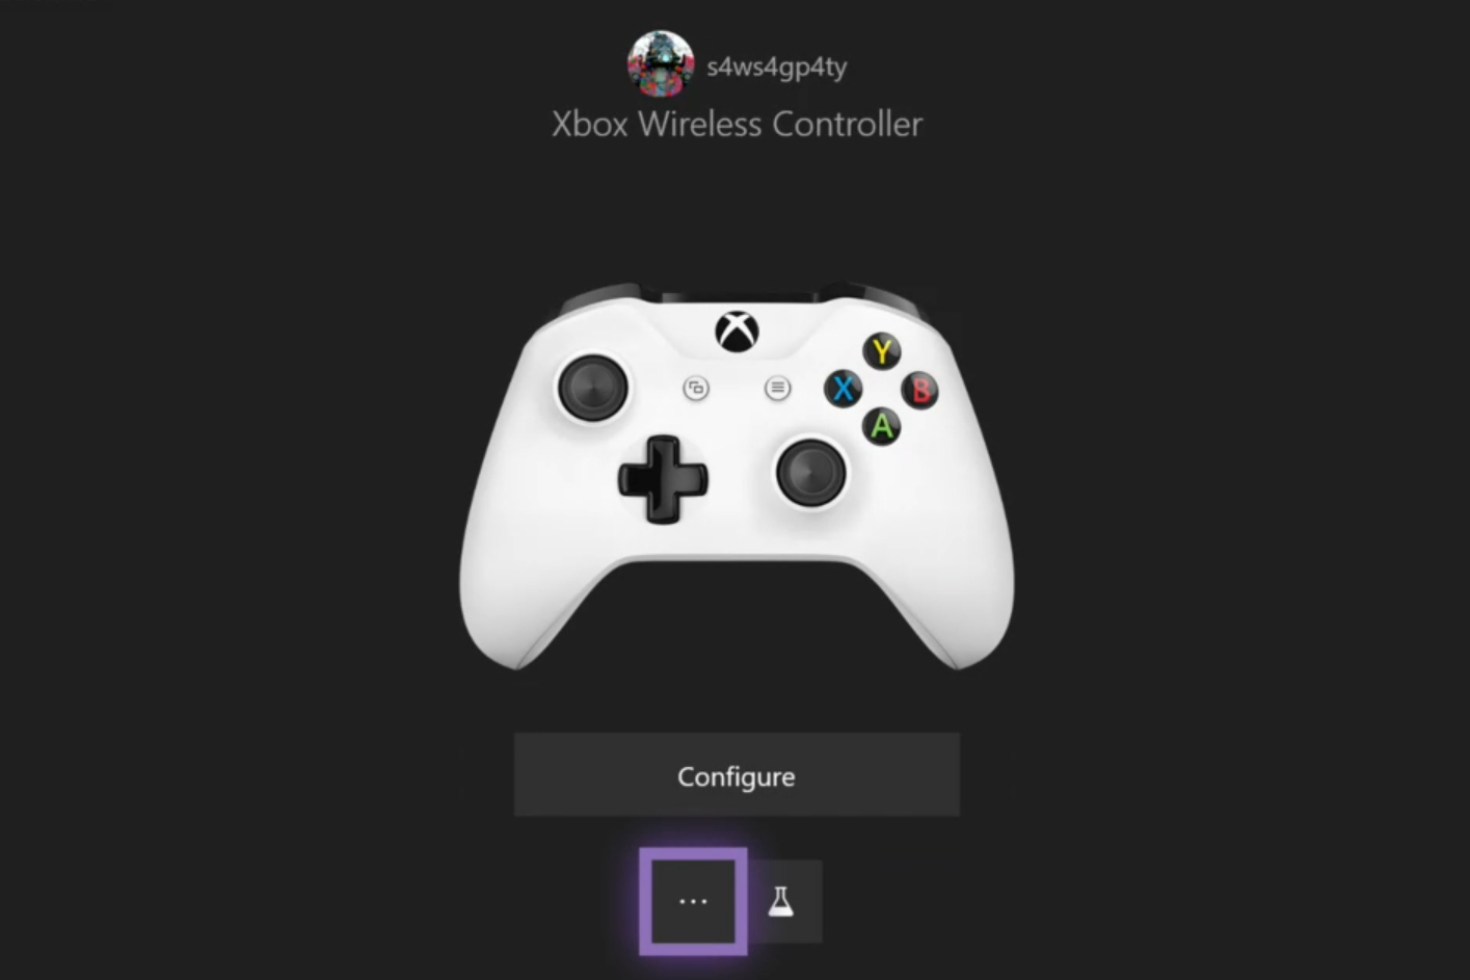 How to activate your game with Xbox PlayAnyWhere 